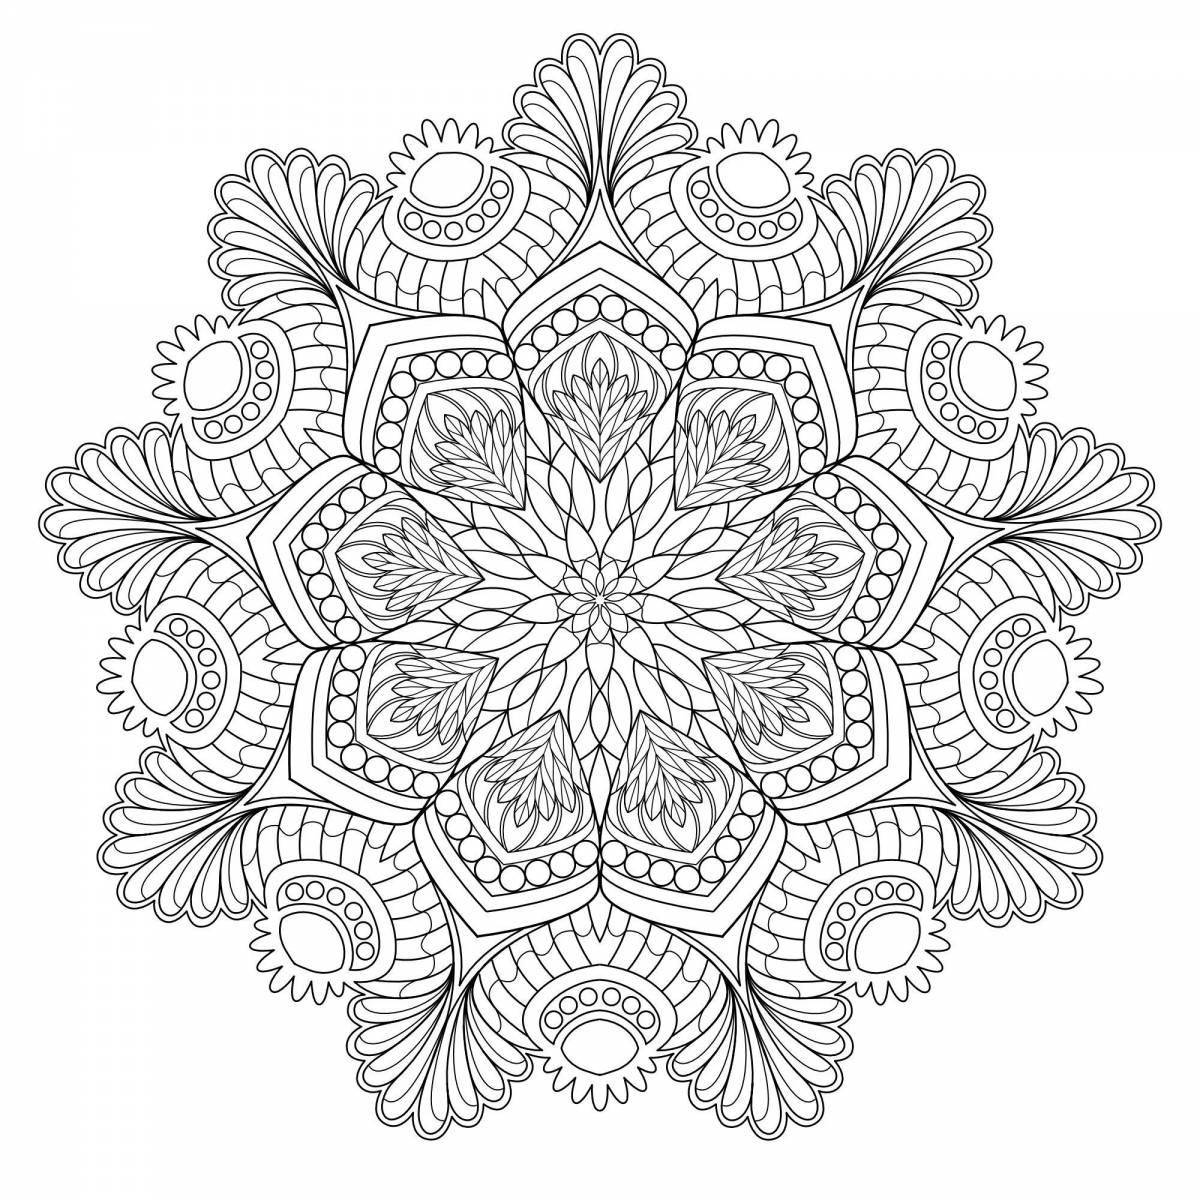 Great coloring for all adult mandalas